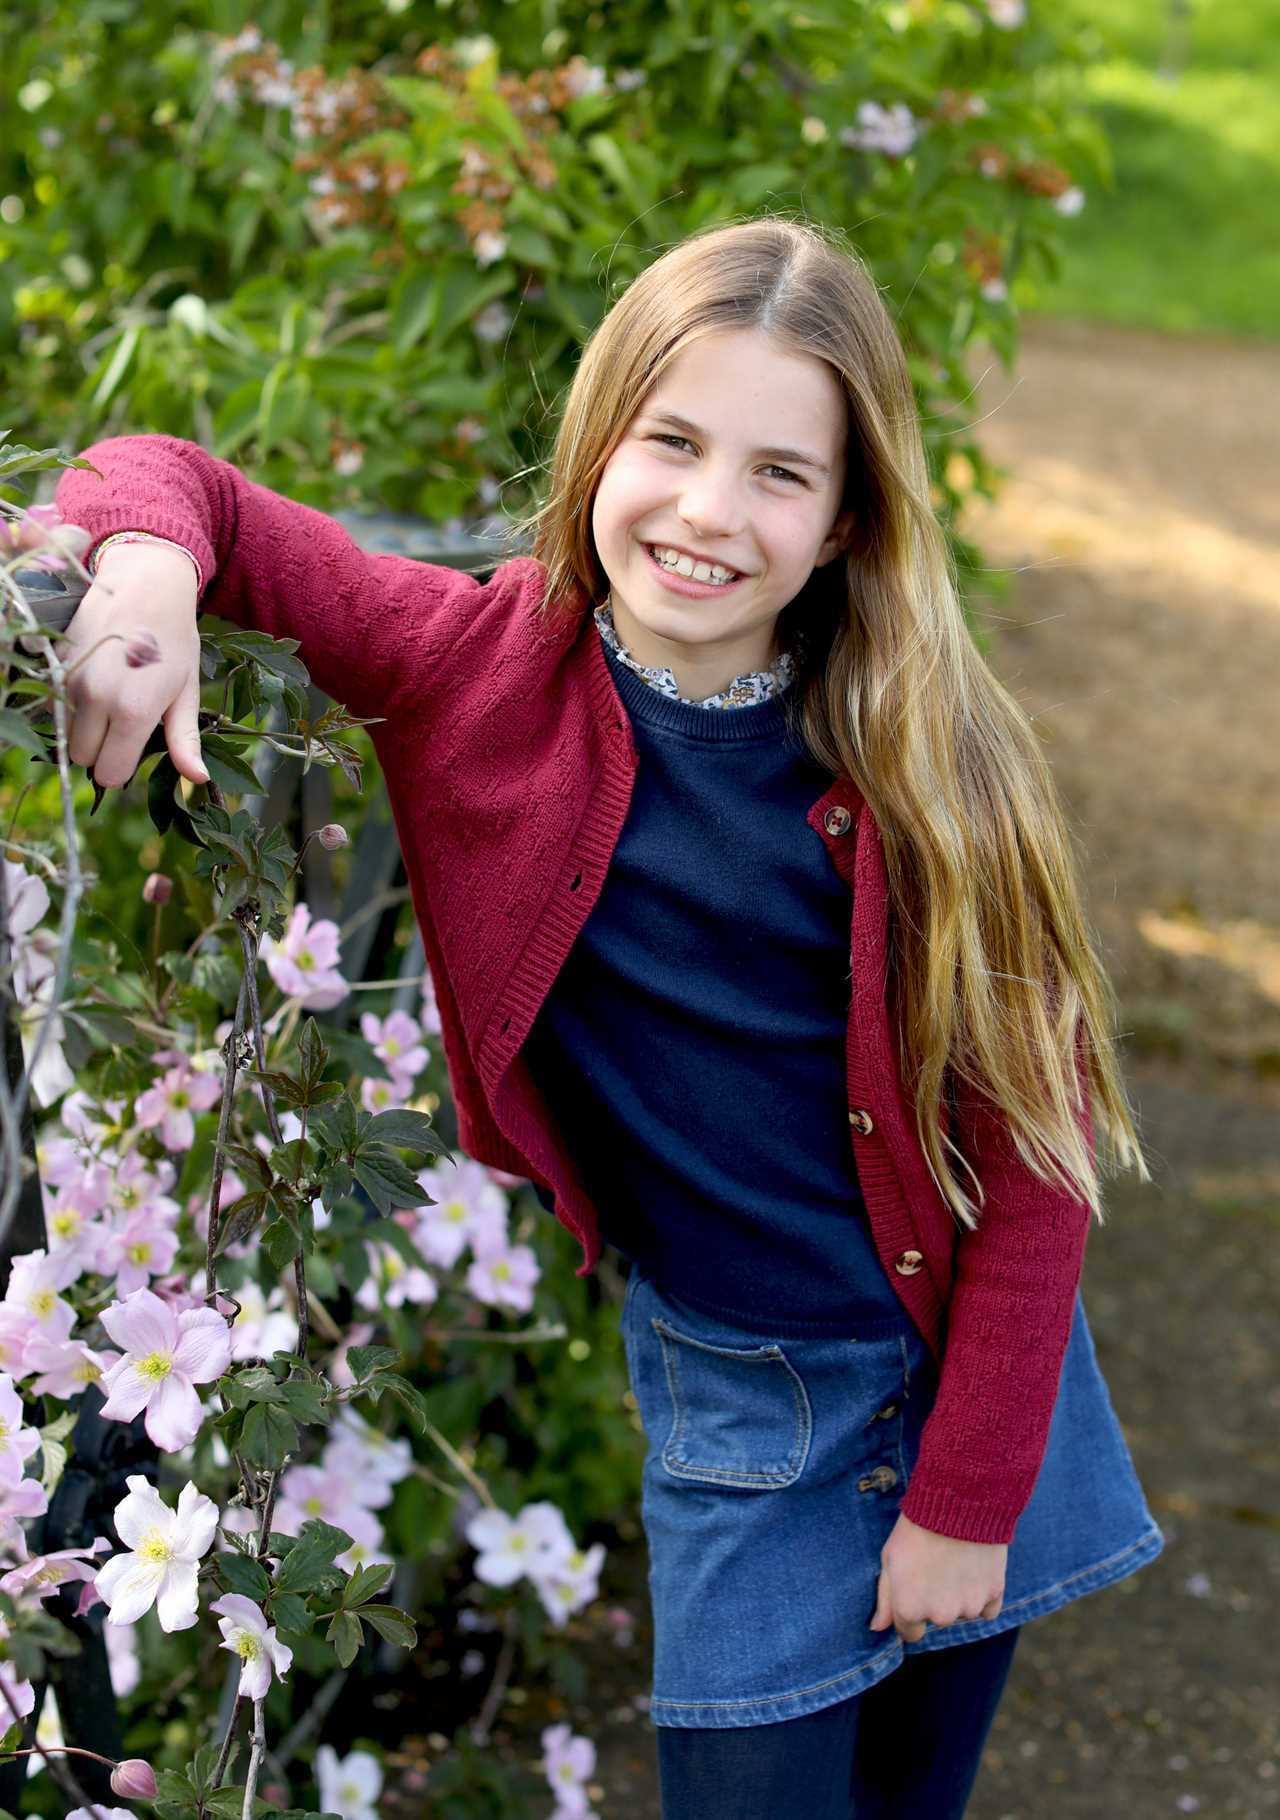 Princess Charlotte's Growing Up: New Photo Released for Her Ninth Birthday